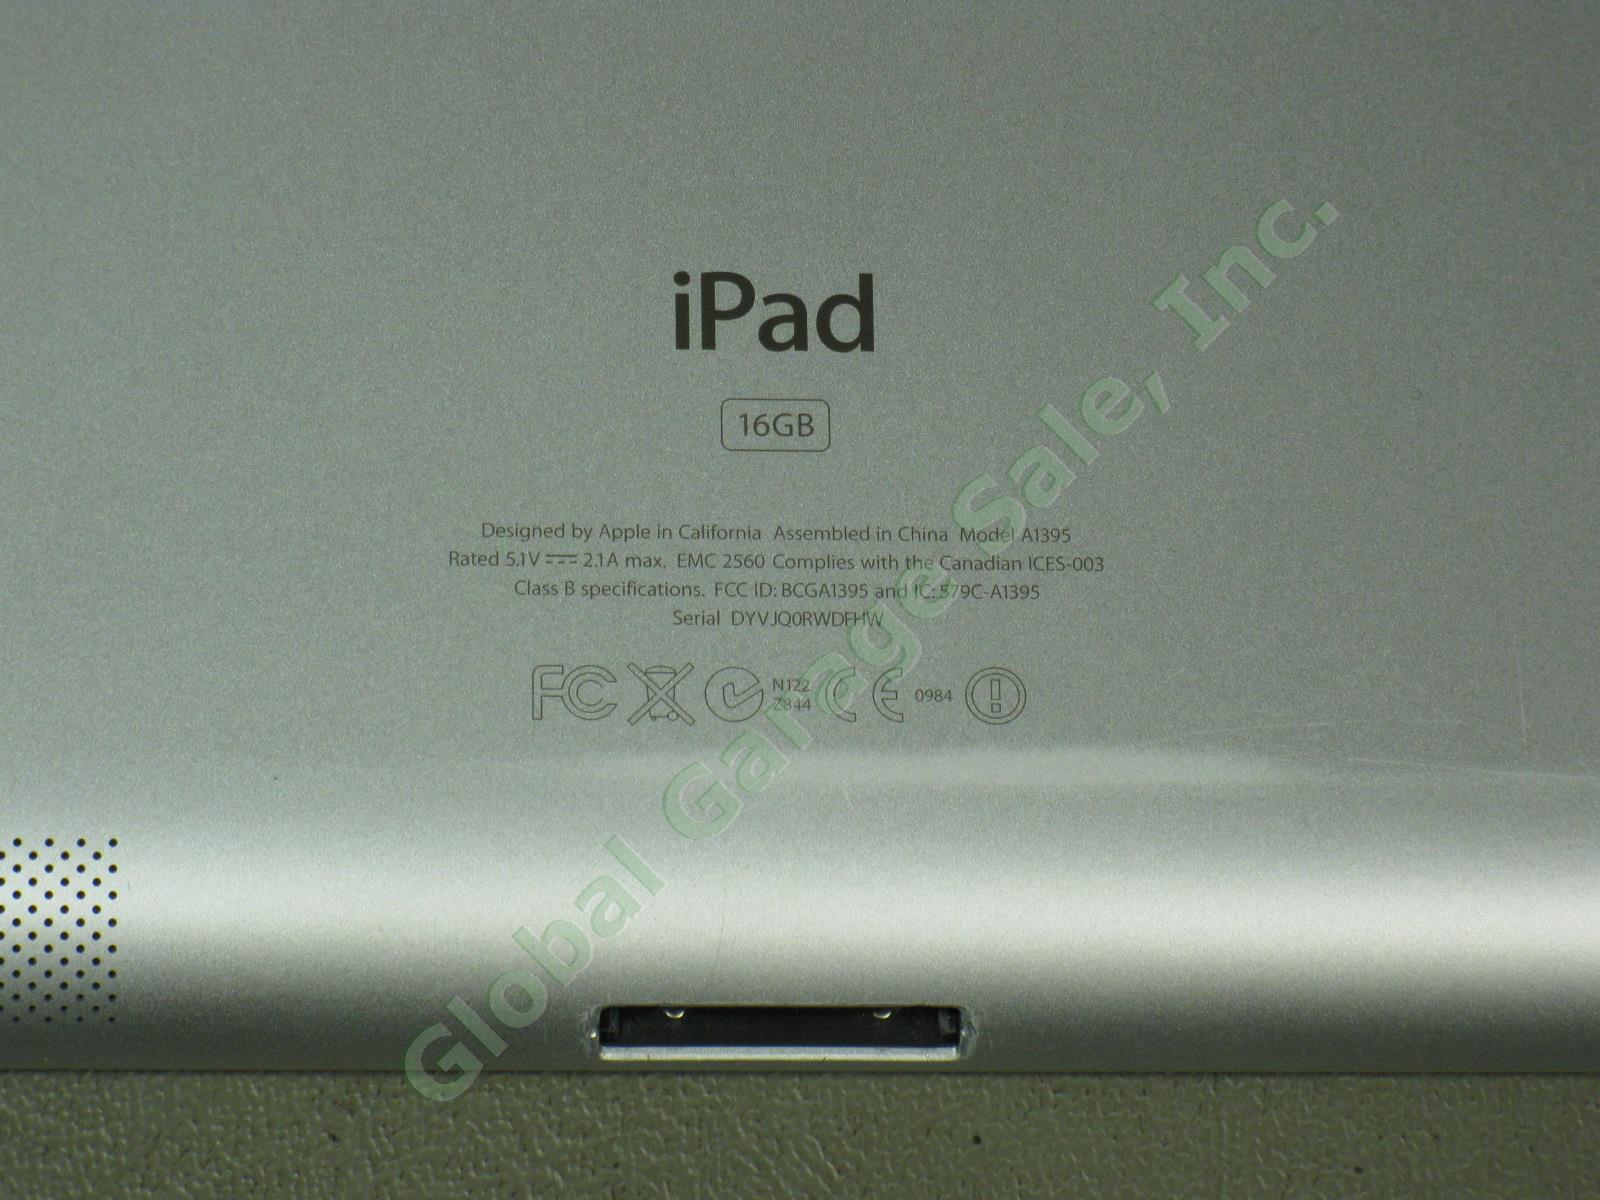 Apple iPad 2 Wifi 16GB Black Tablet Works Great MC770LL/A A1395 No Reserve Price 4